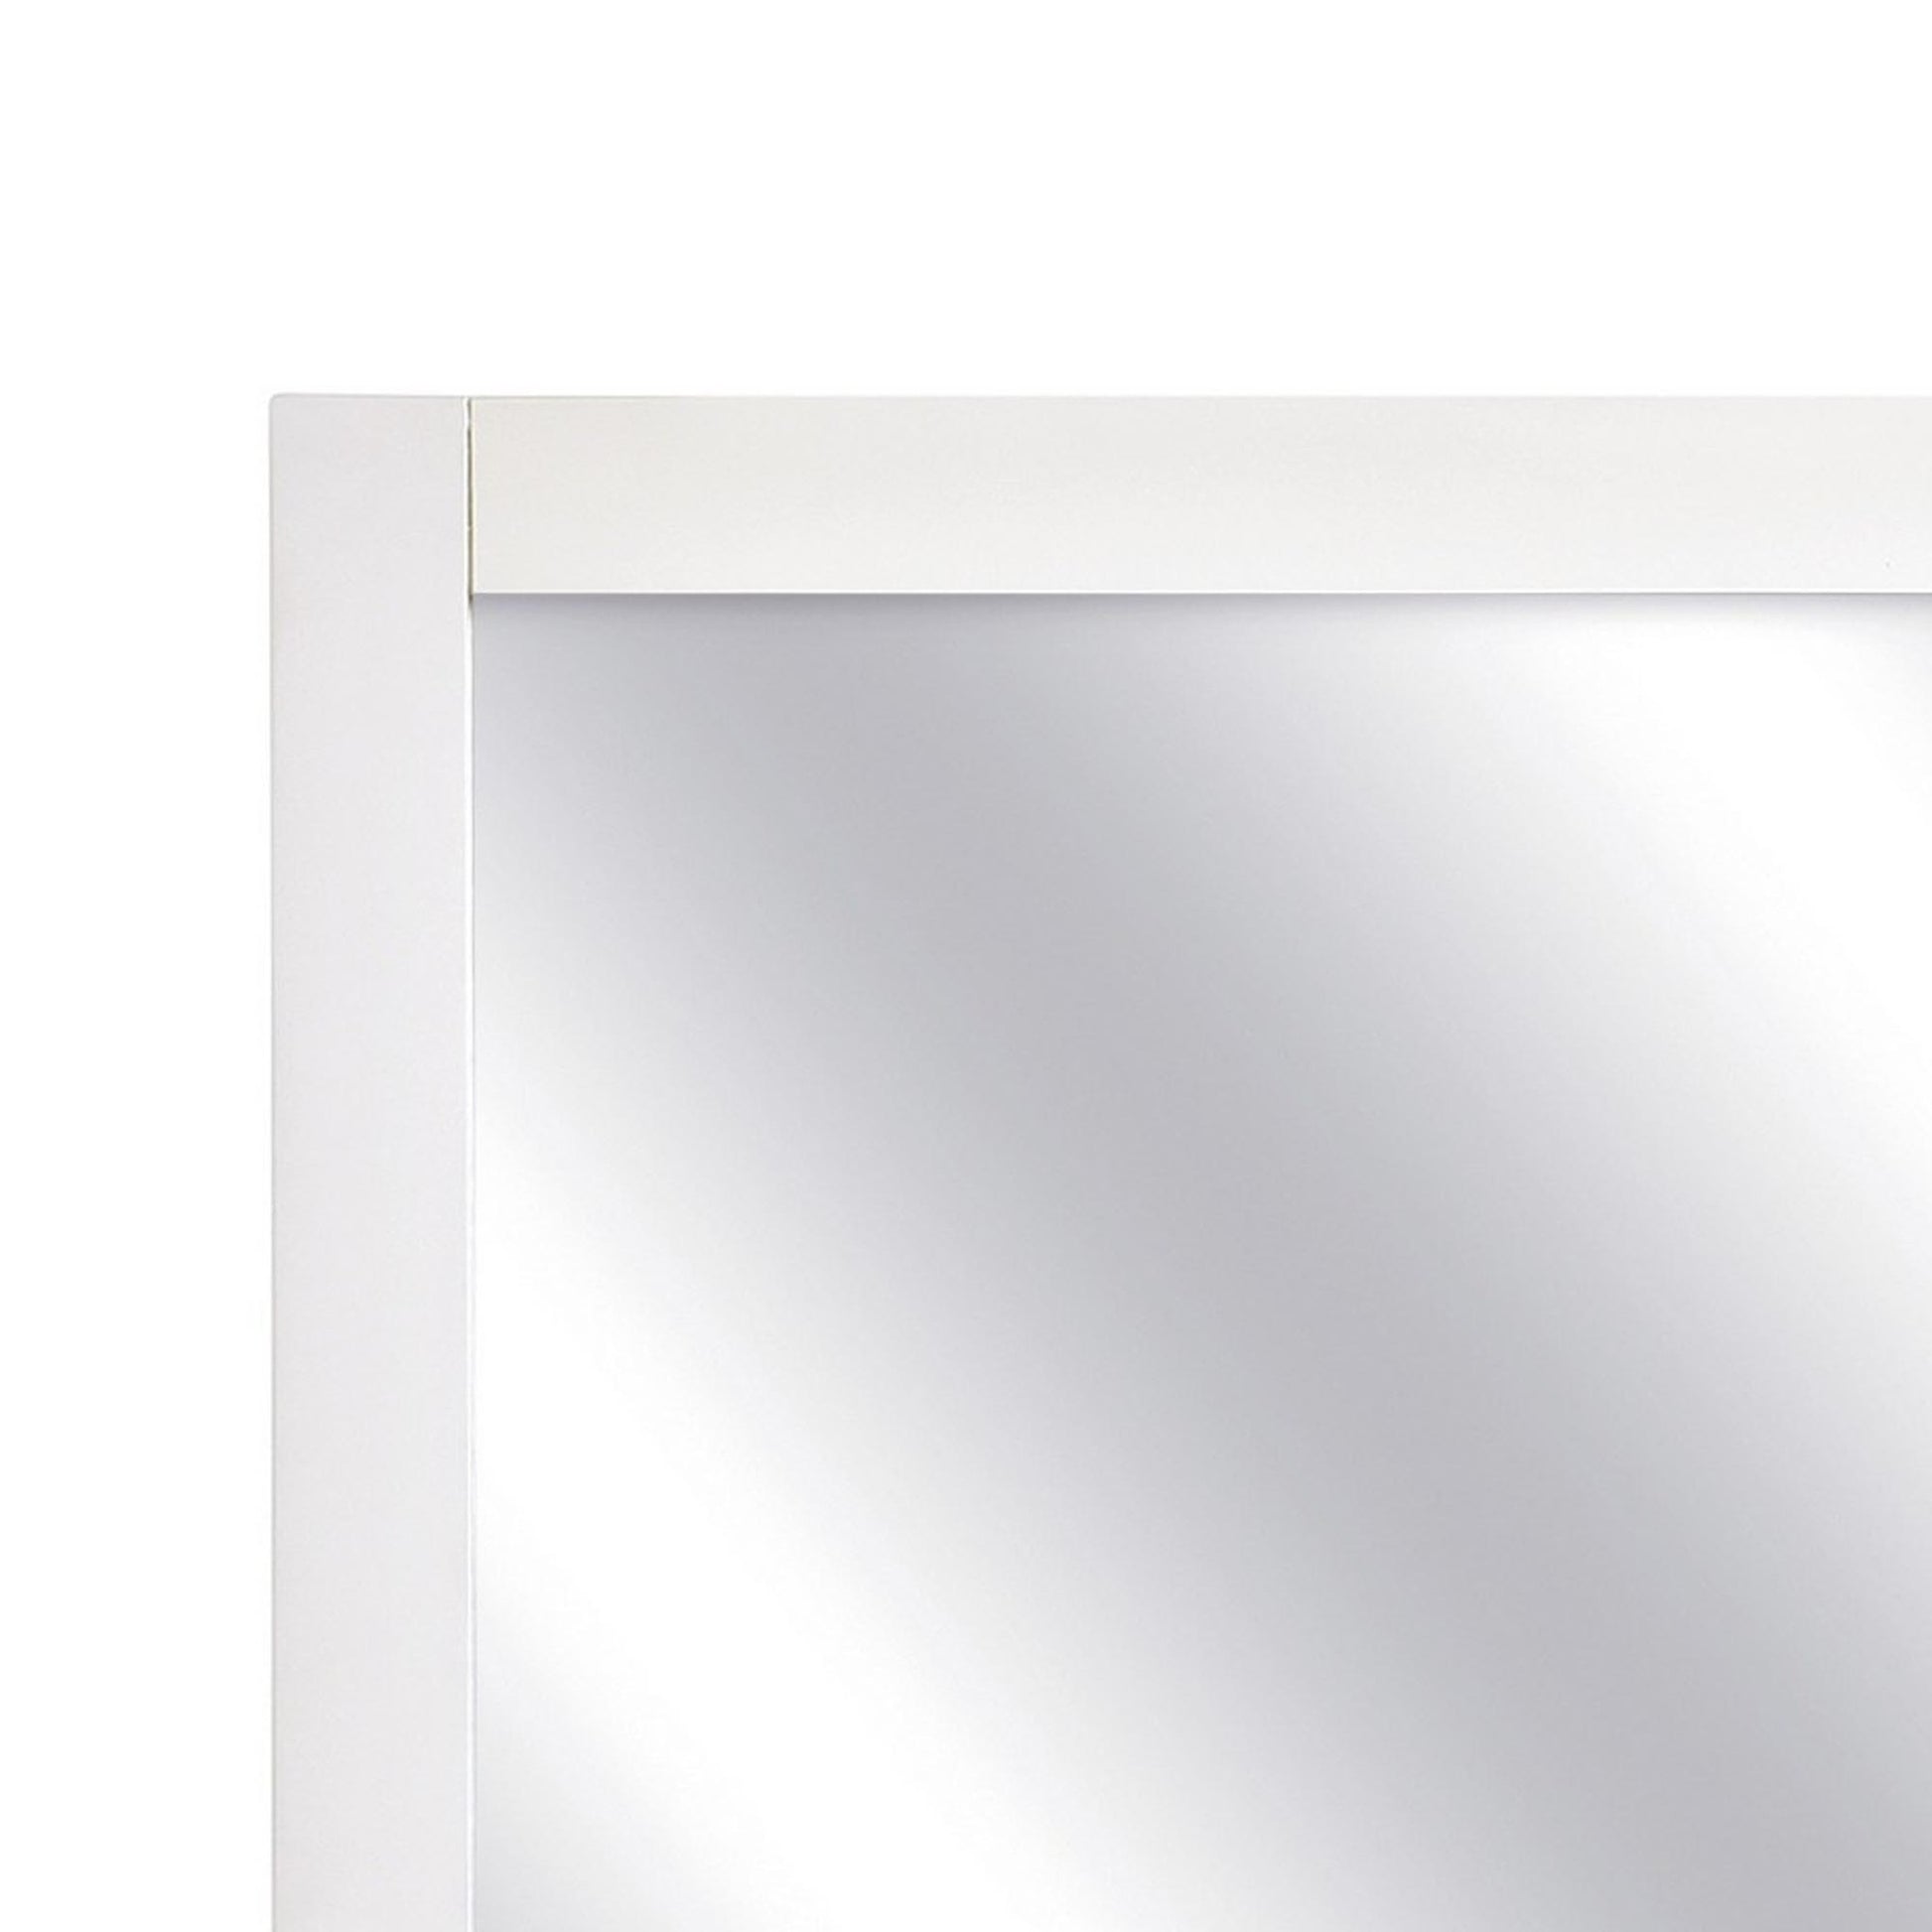 Benzara White and Silver Square Shape Wooden Frame Mirror With Mounting Hardware